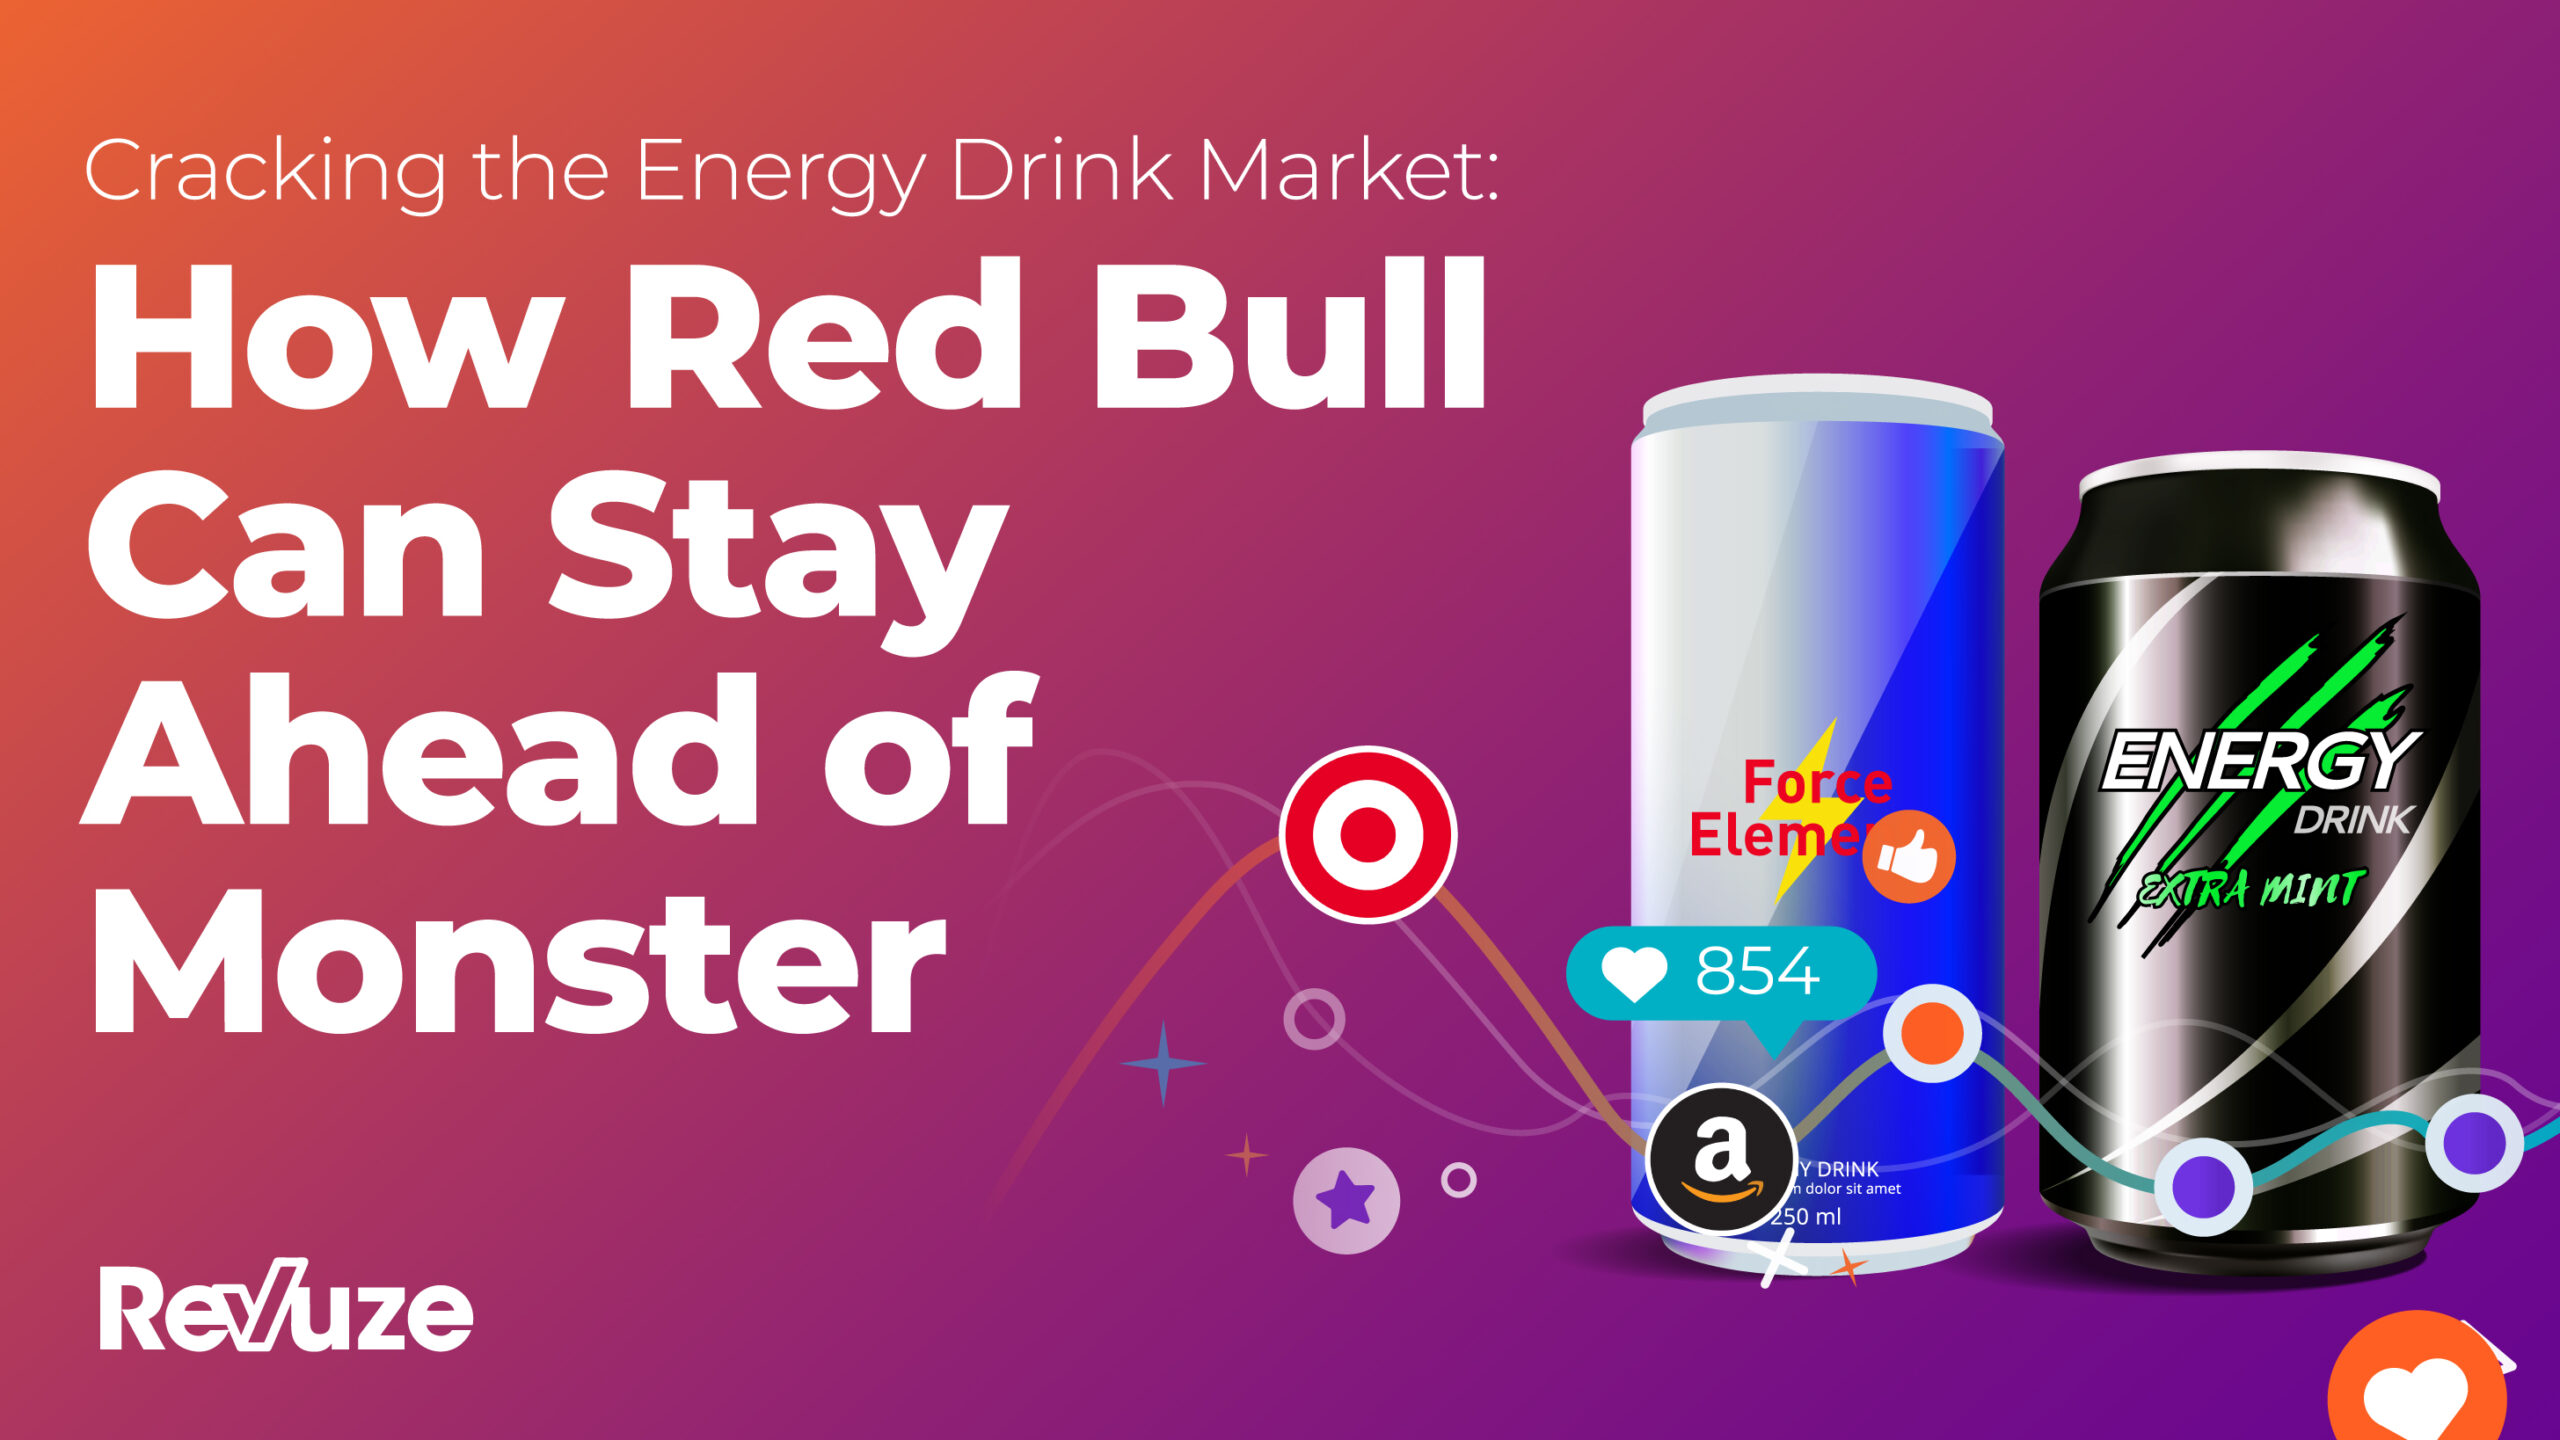 Cracking the Energy Drink Market: How Red Bull Can Stay Ahead of Monster